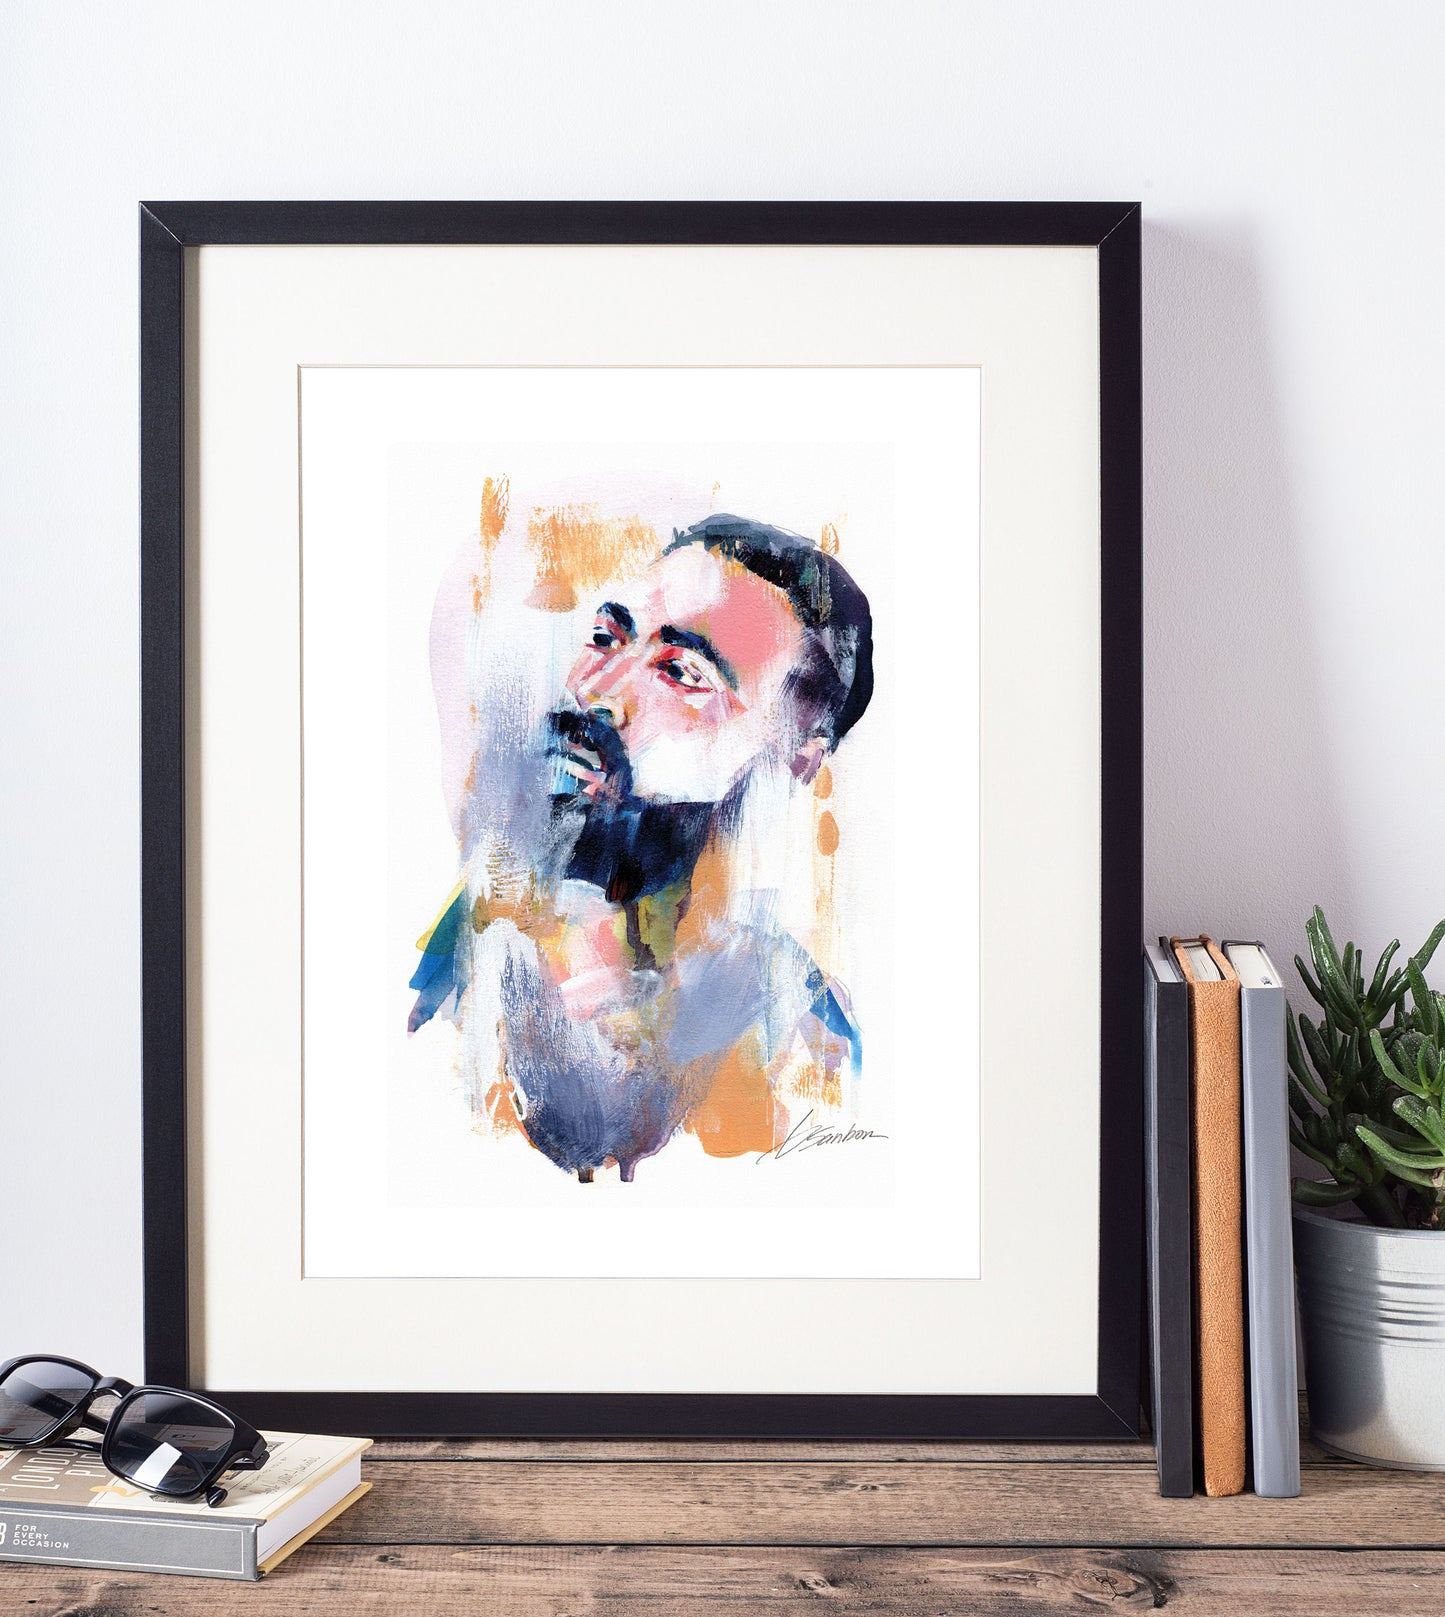 Introspective Bearded Man in Profile - 6x9" Original Watercolor Painting